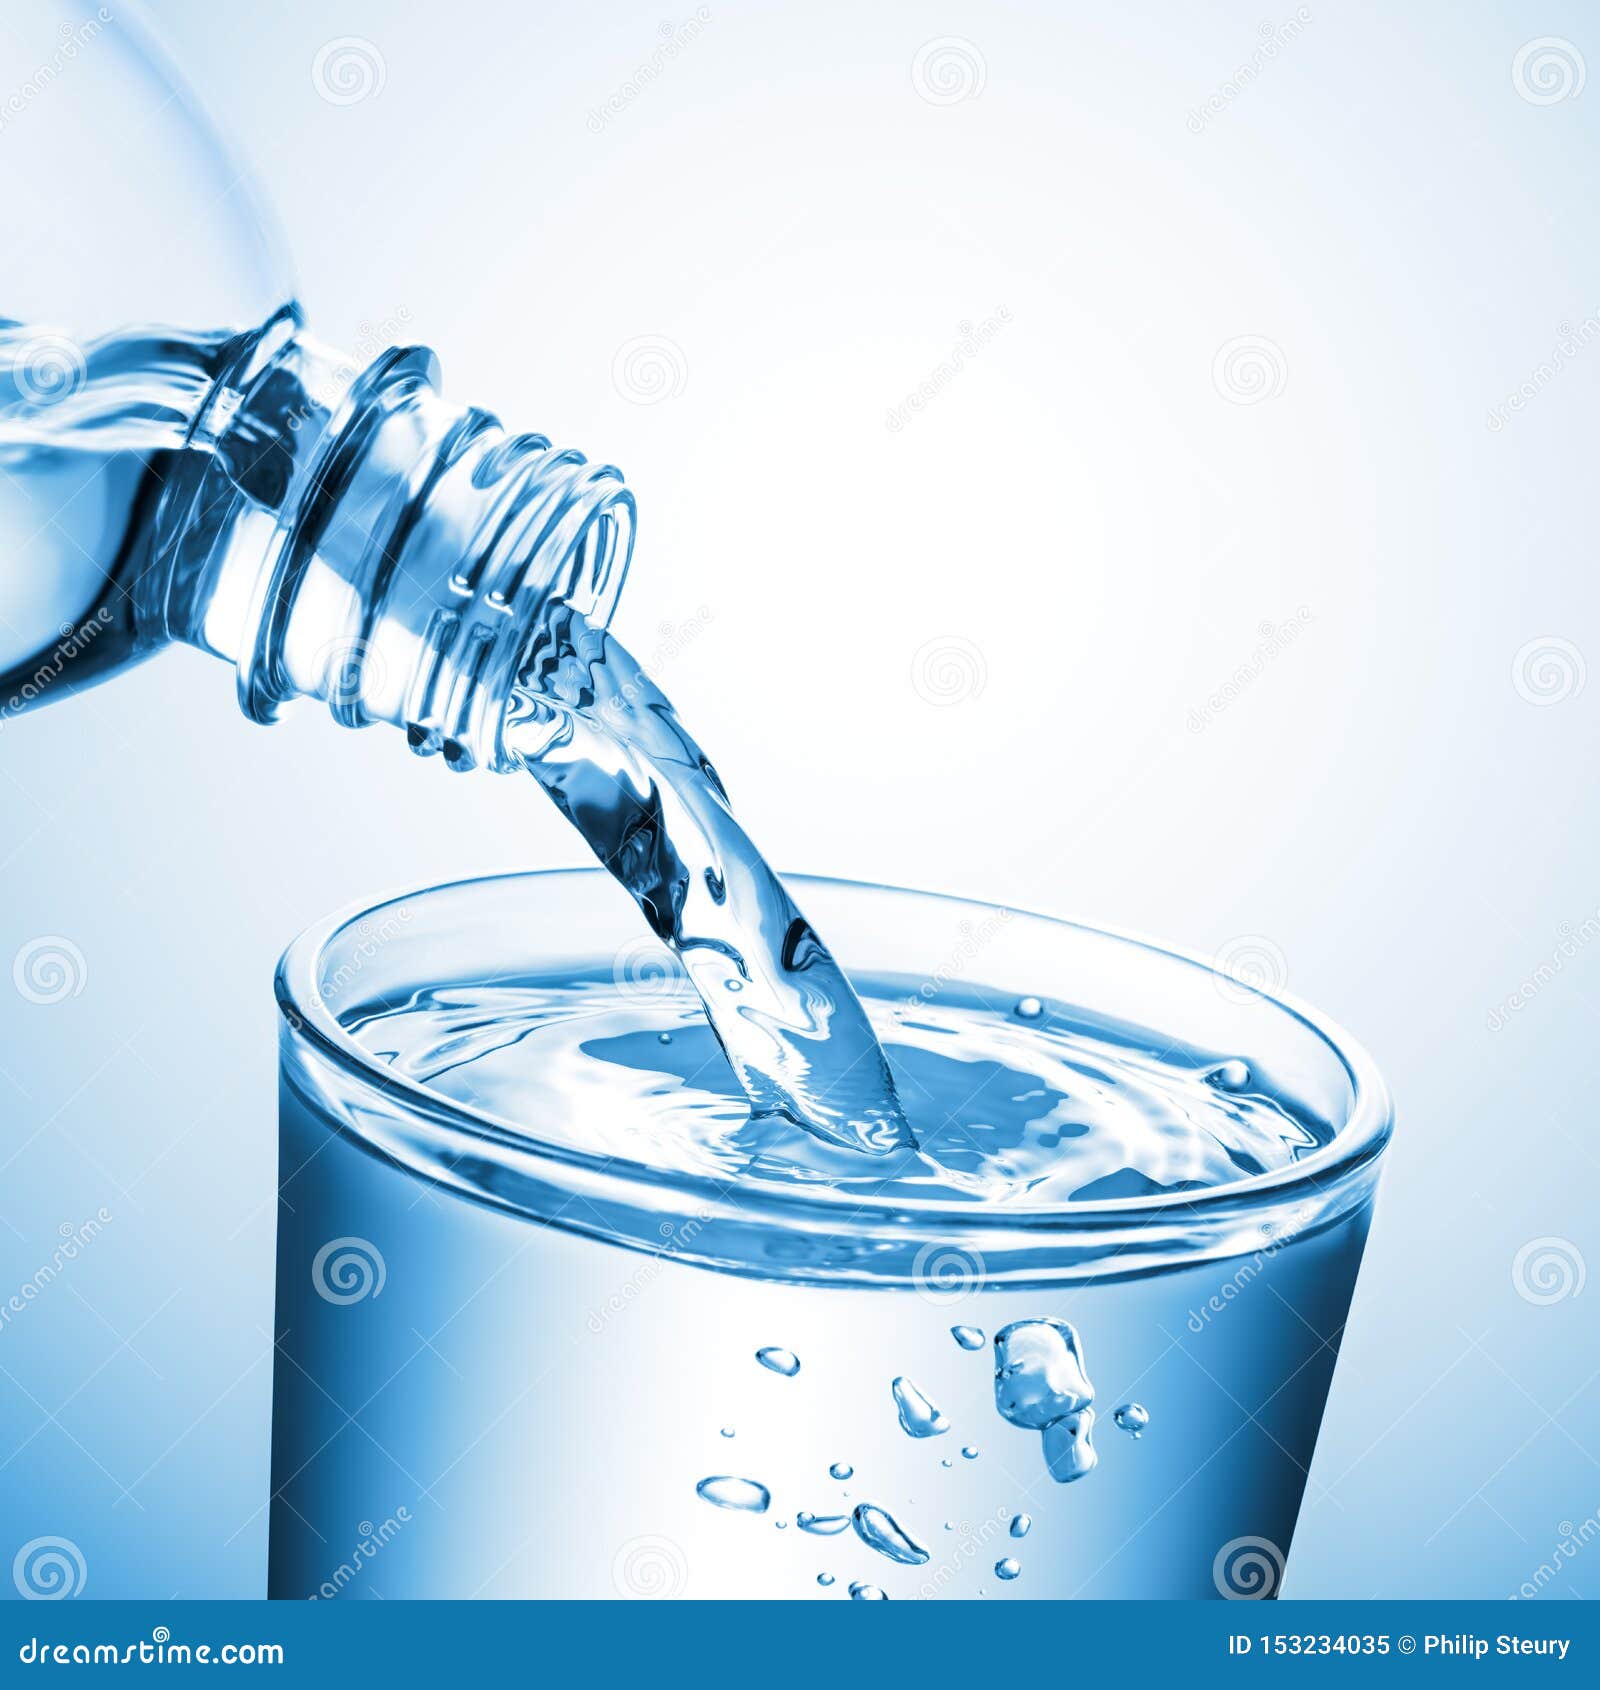 List 95+ Wallpaper Picture Of A Cup Of Water Sharp